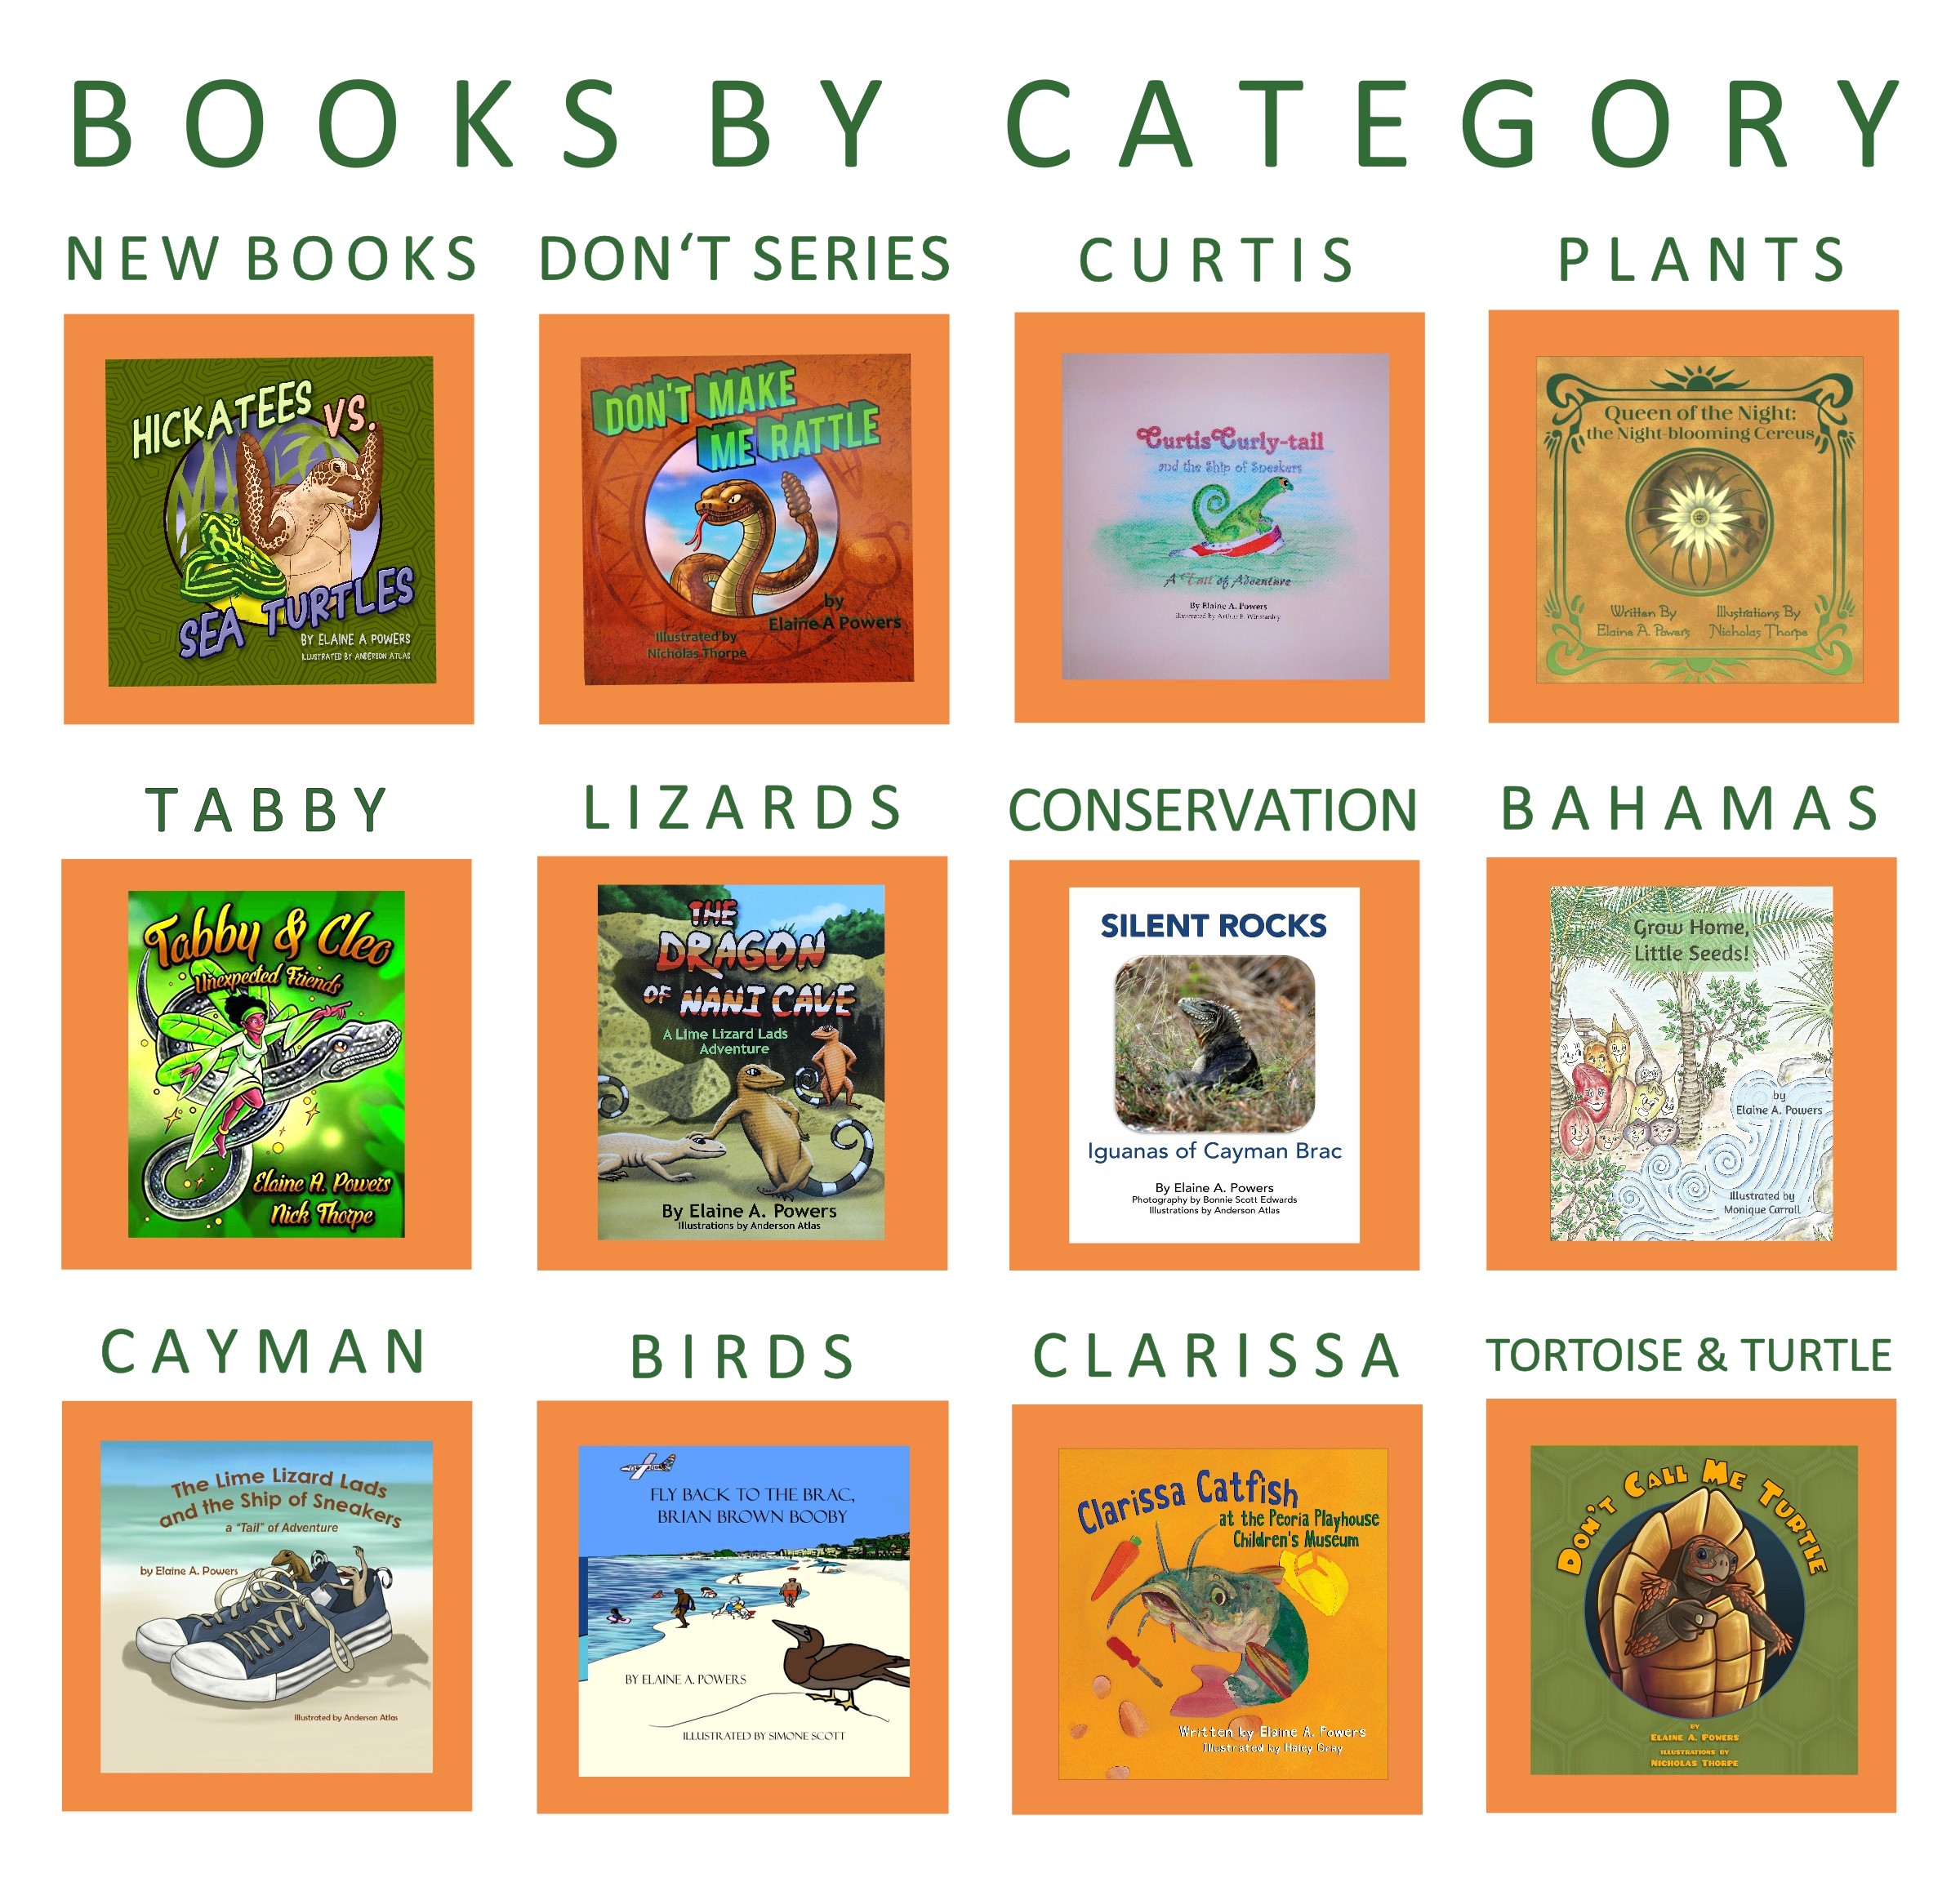 A collage of book covers indicating the categories of books at elaineapowers.com